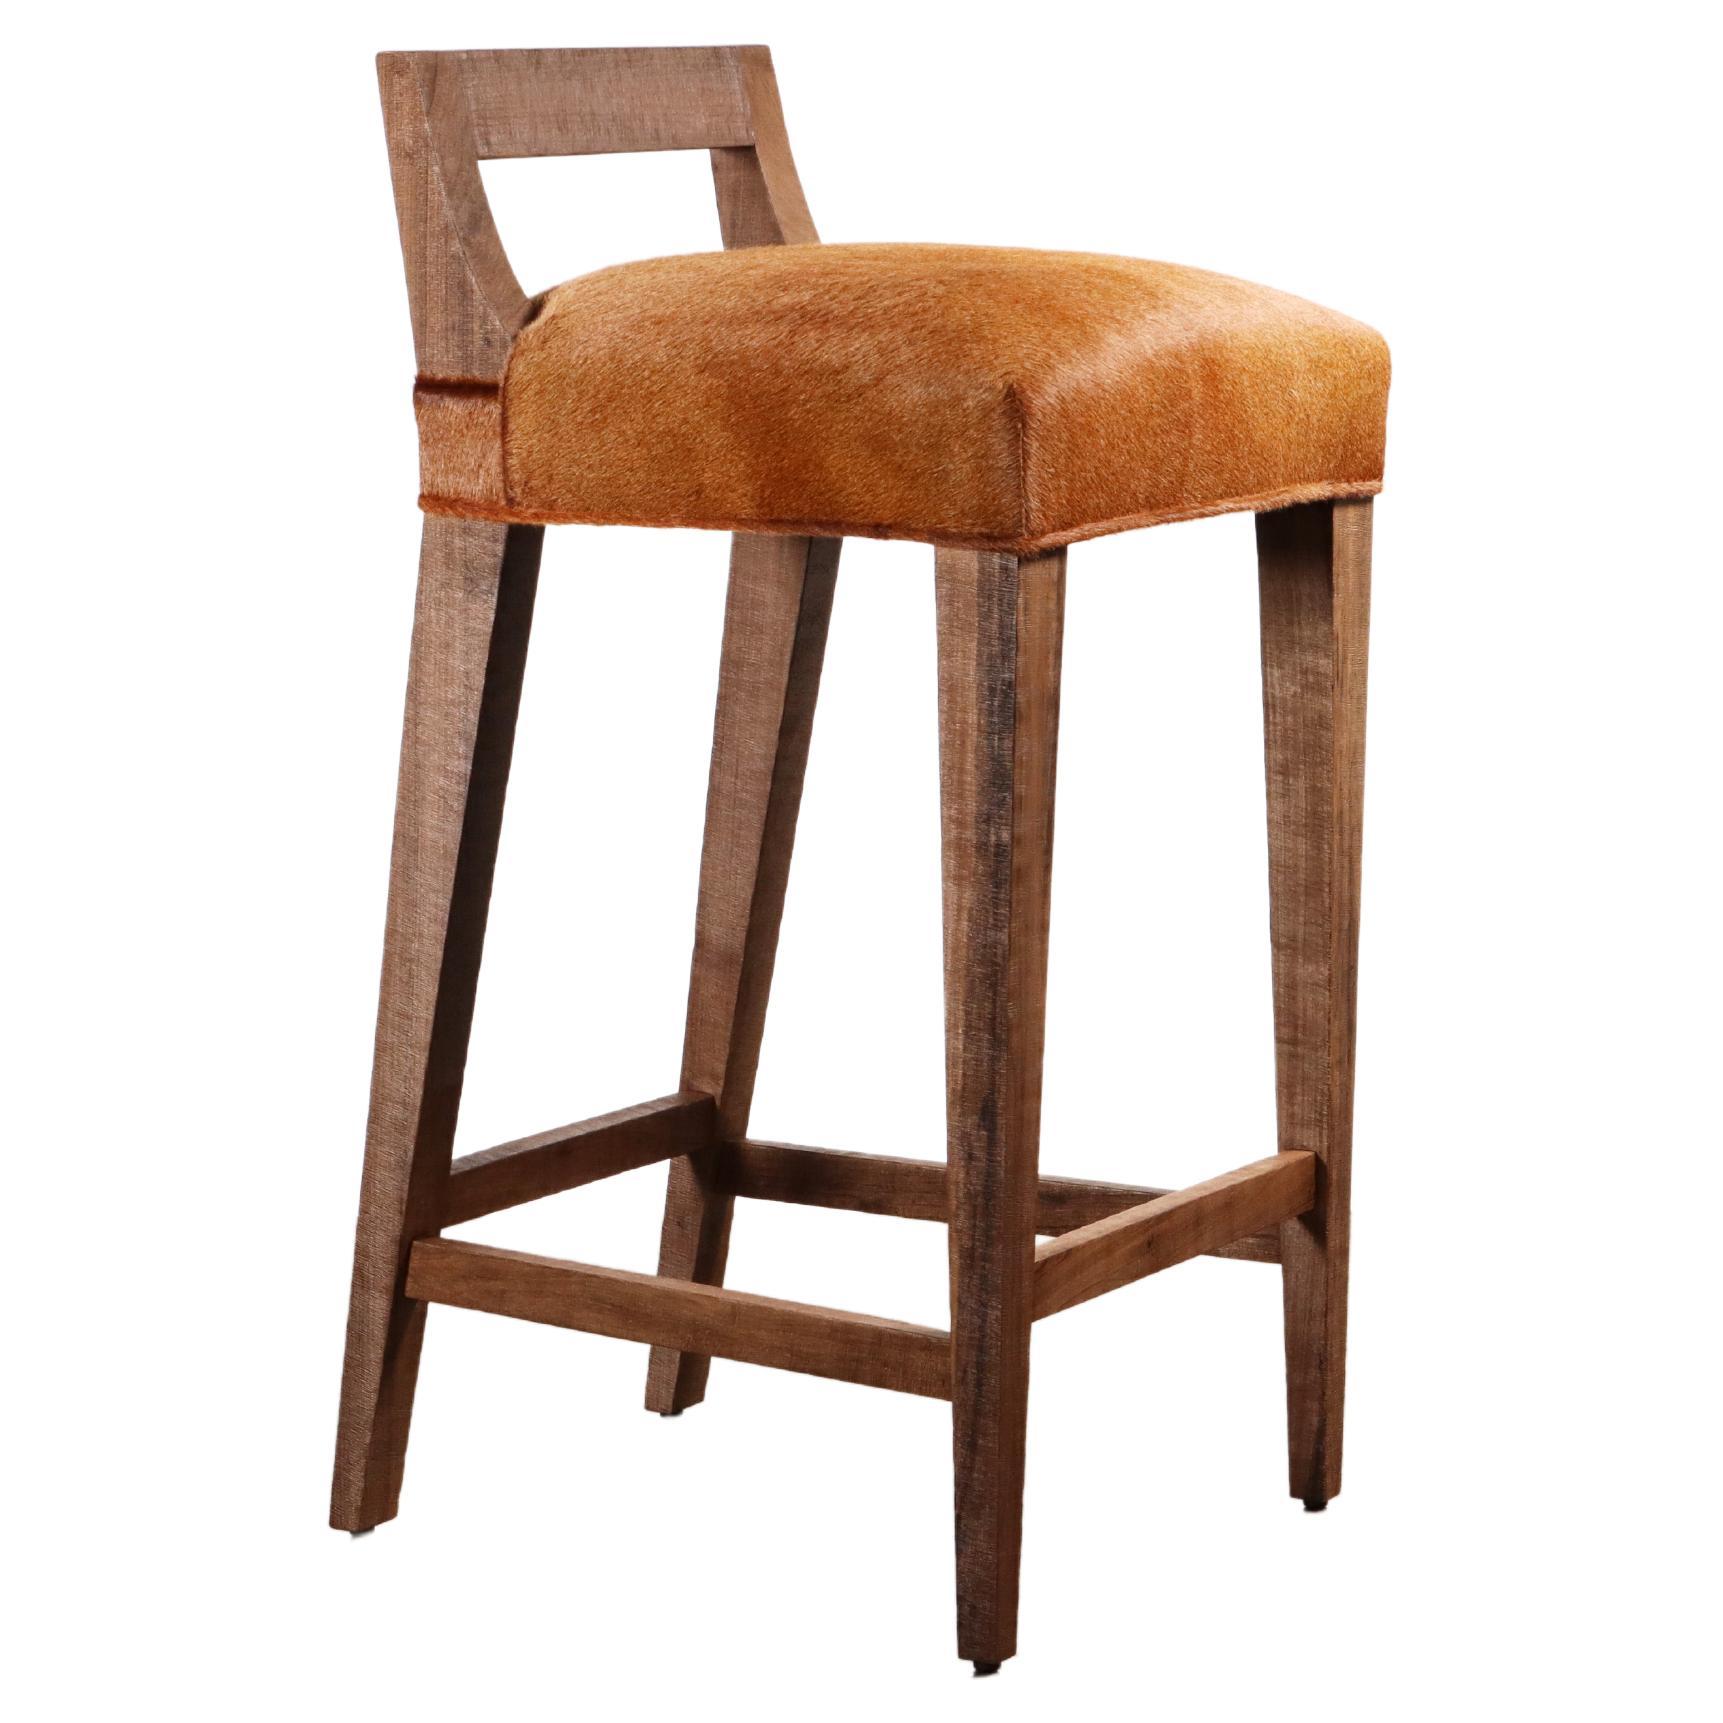 Exotic Wood Contemporary Stool in Hair Hide Leather from Costantini, Ecco For Sale